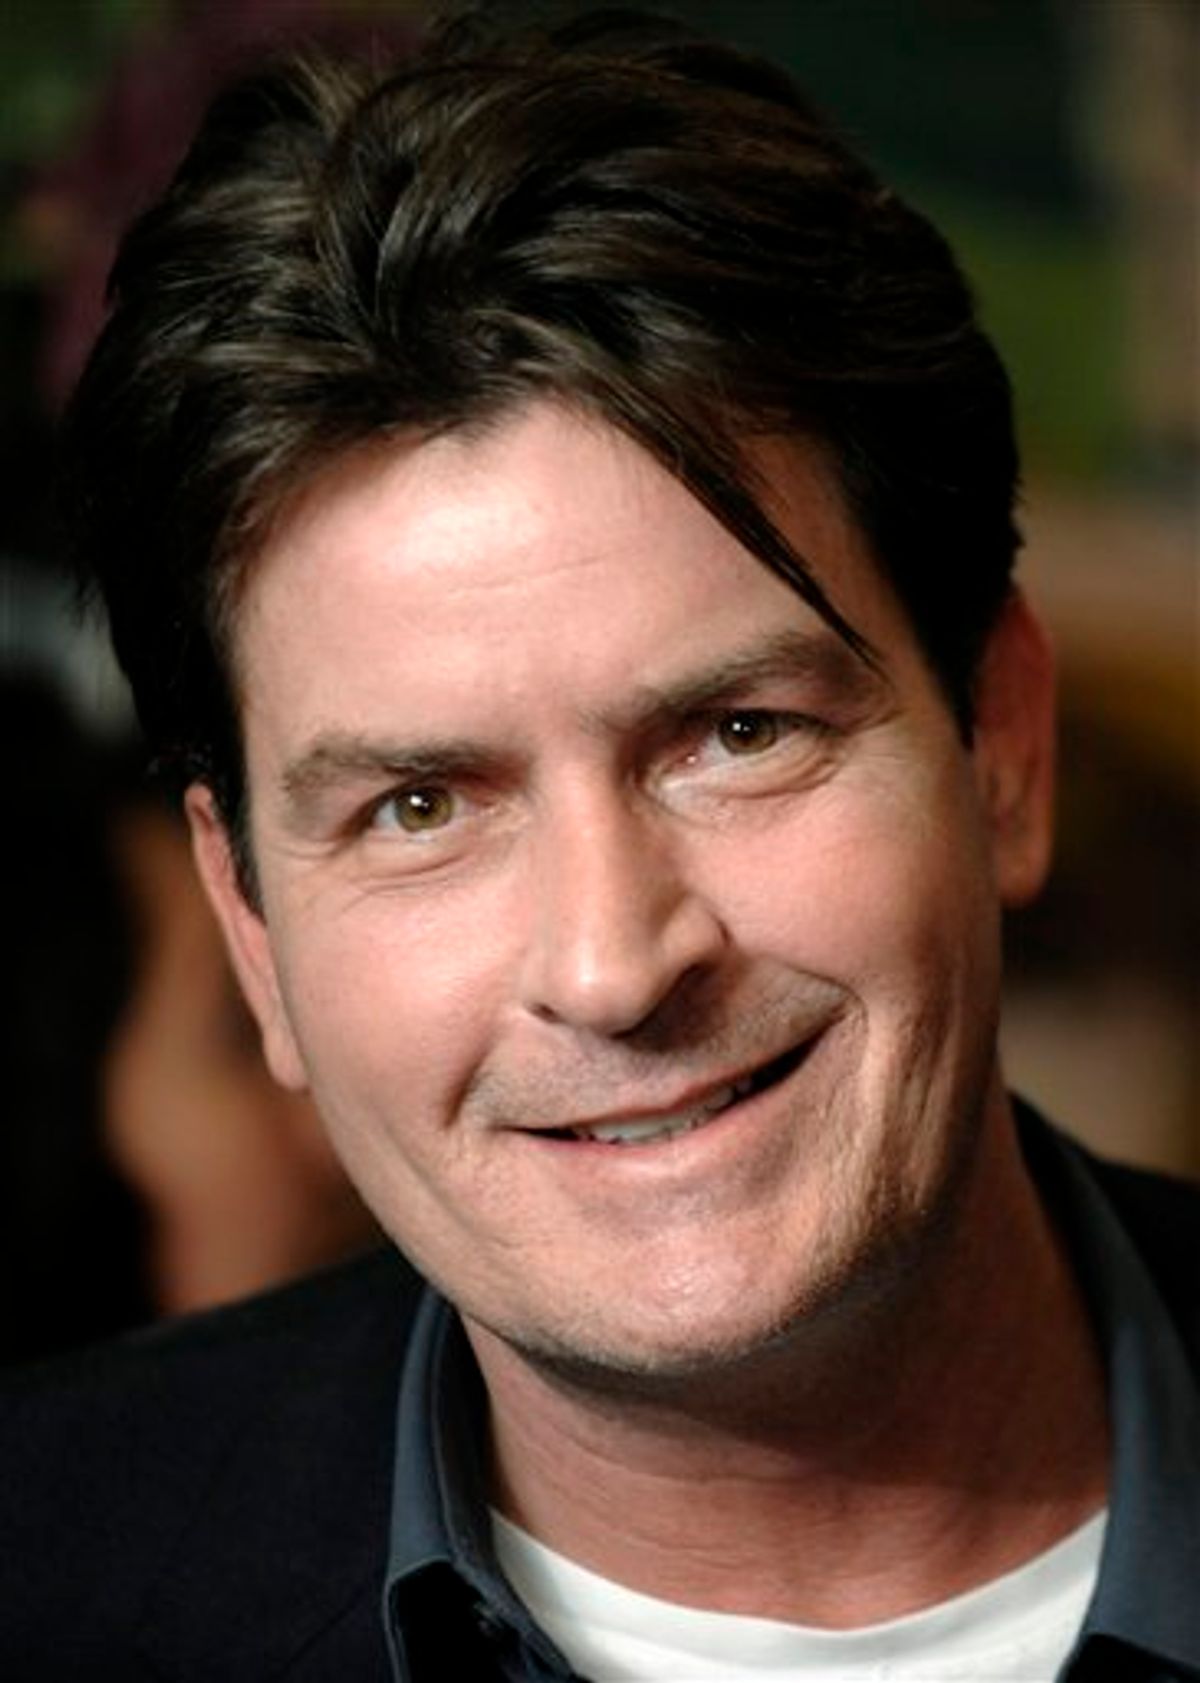 FILE - This Jan. 28, 2009 file photo shows Charlie Sheen in Los Angeles. (AP Photo/Chris Pizzello, File) (AP)